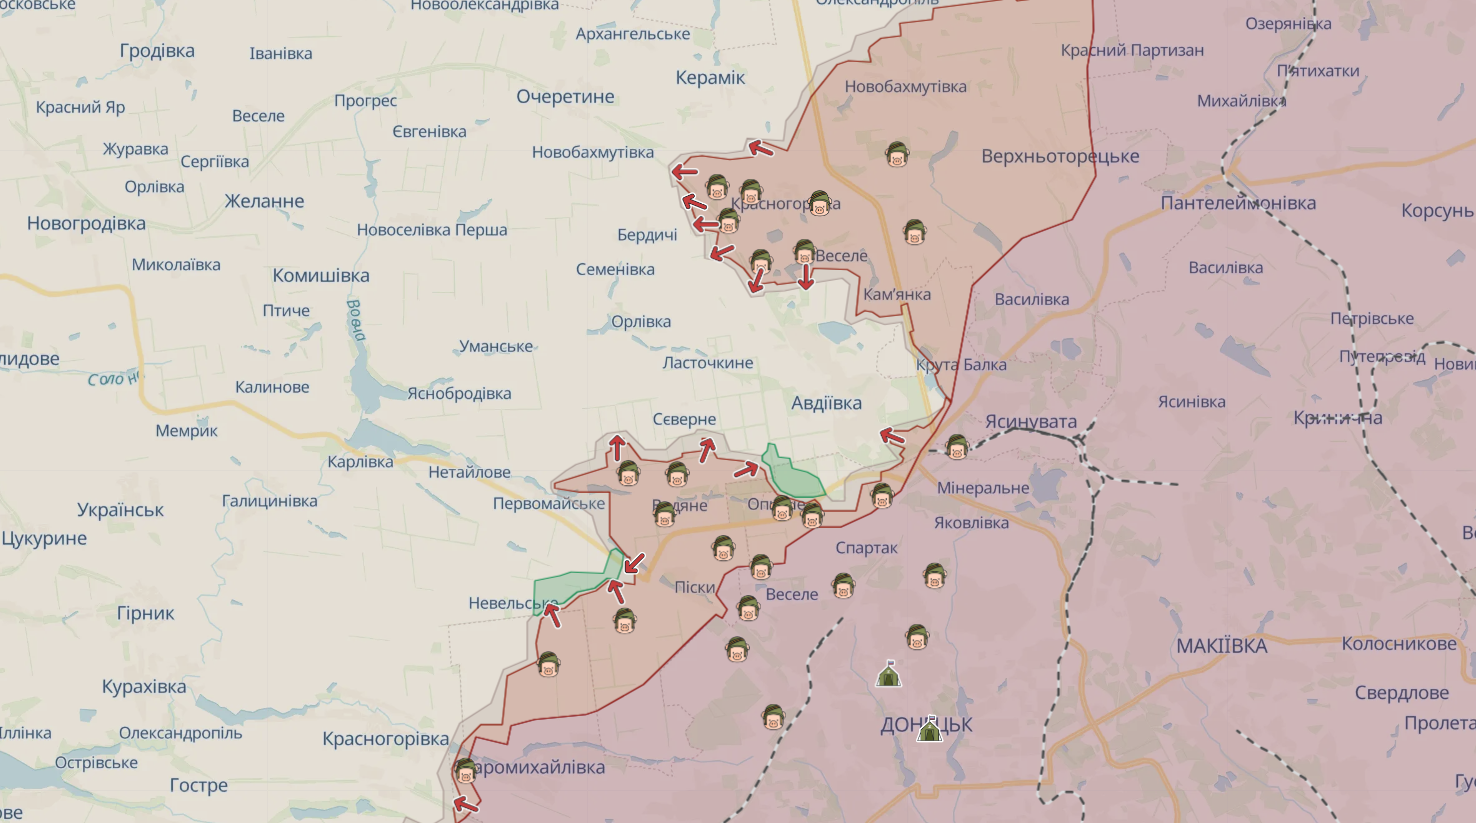 The situation in the Avdiivka direction